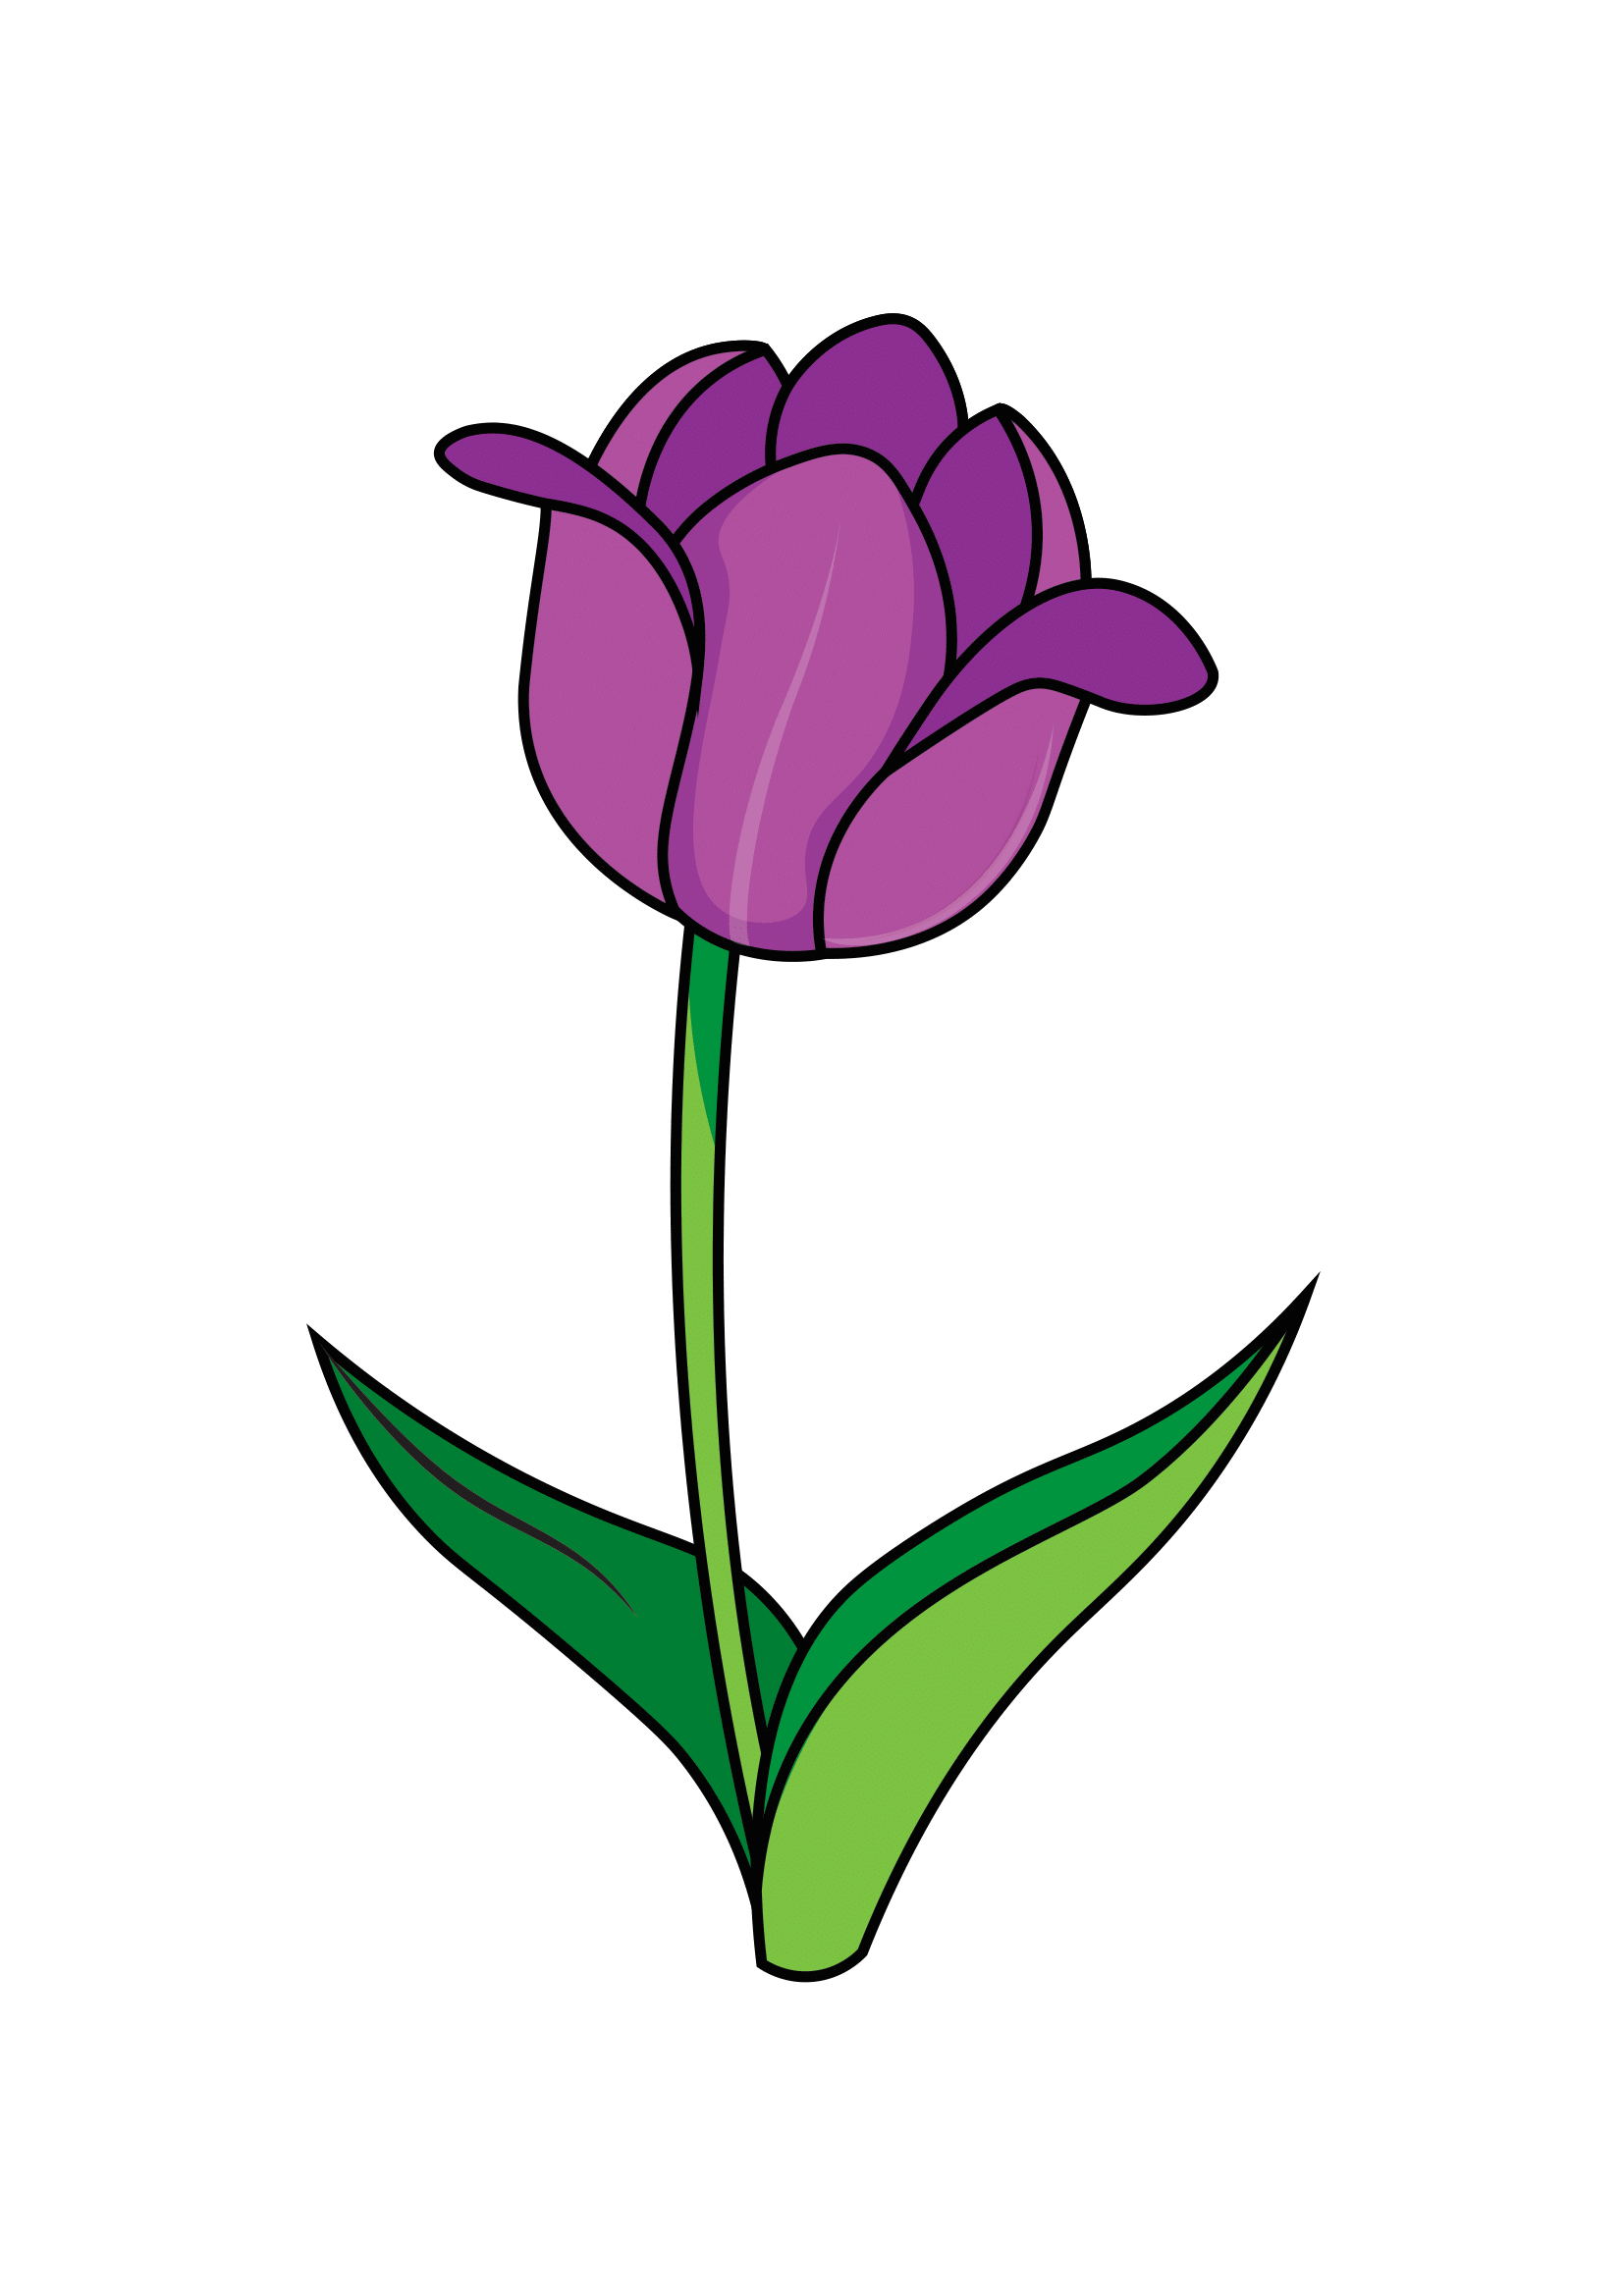 How to Draw A Tulip Step by Step Printable